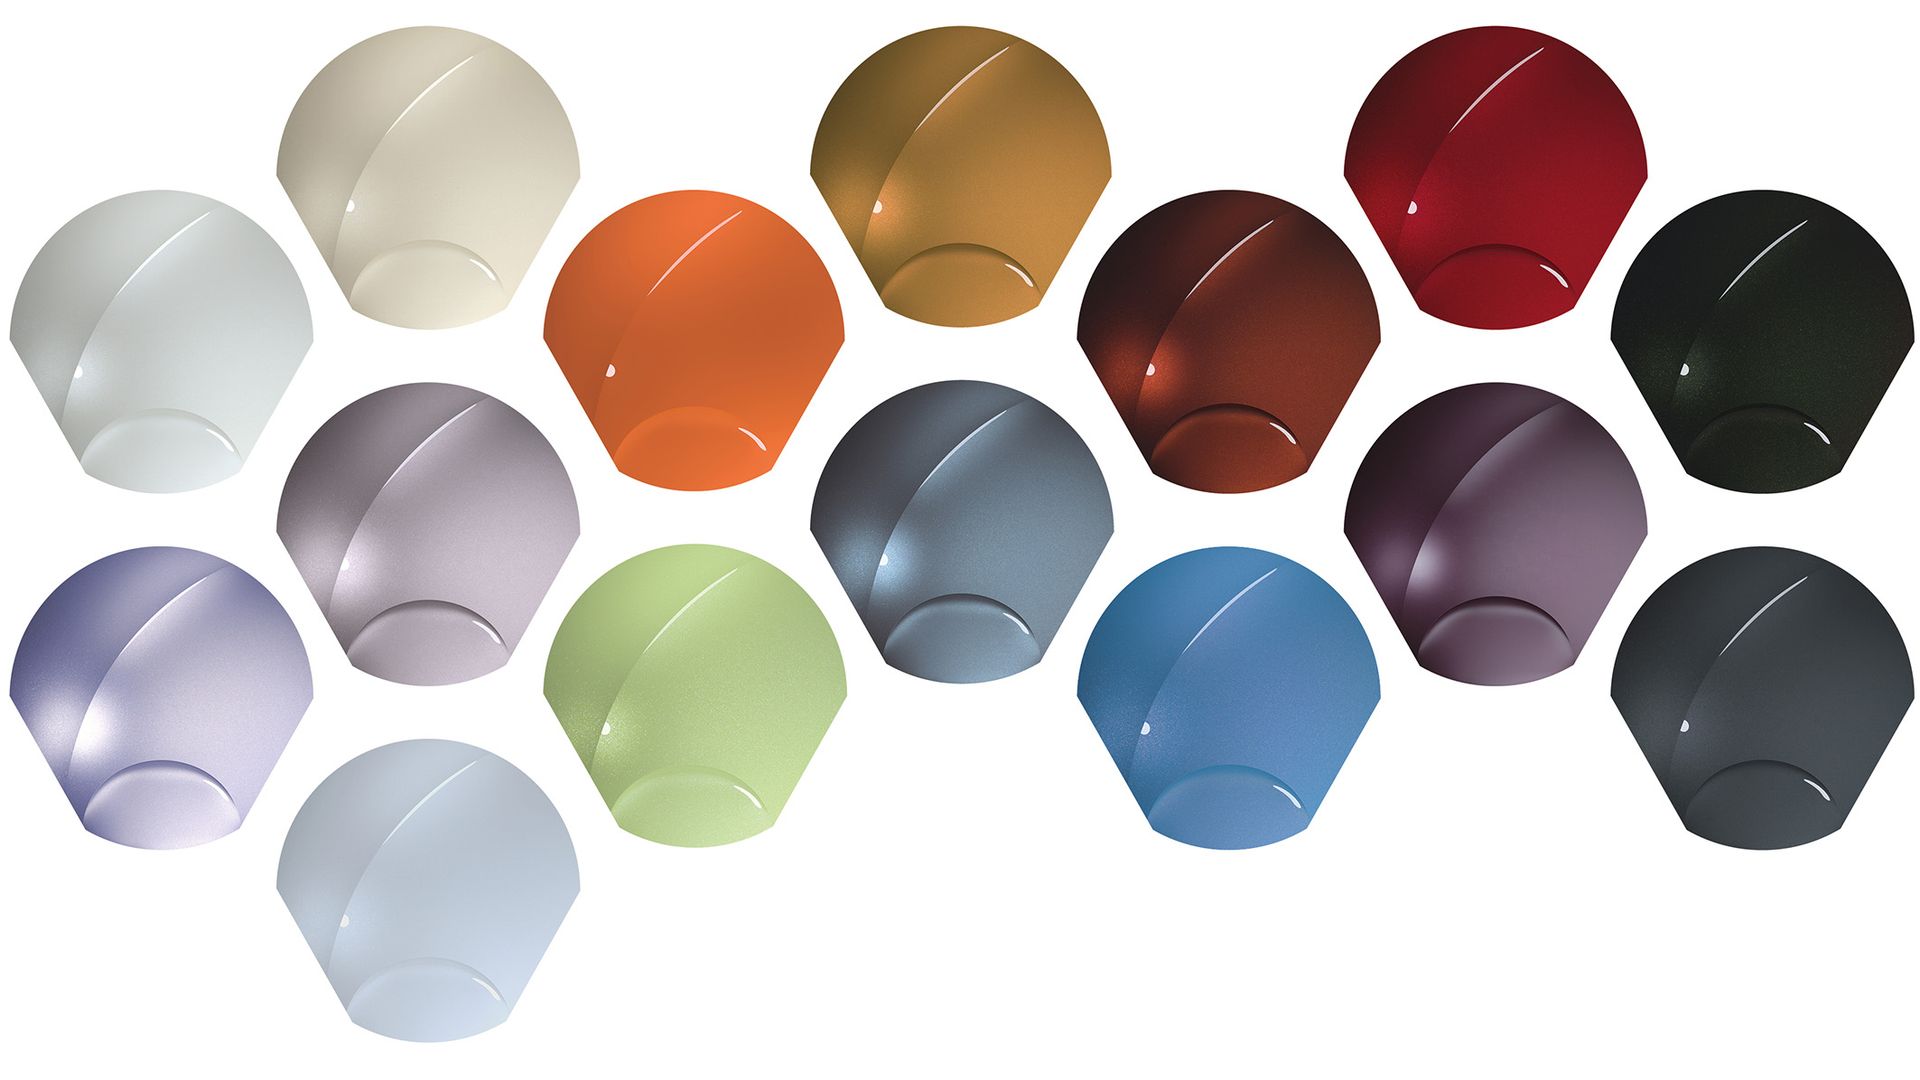 A rainbow of colors that will be popular in cars in the coming years, from BASF's 2021 collection.